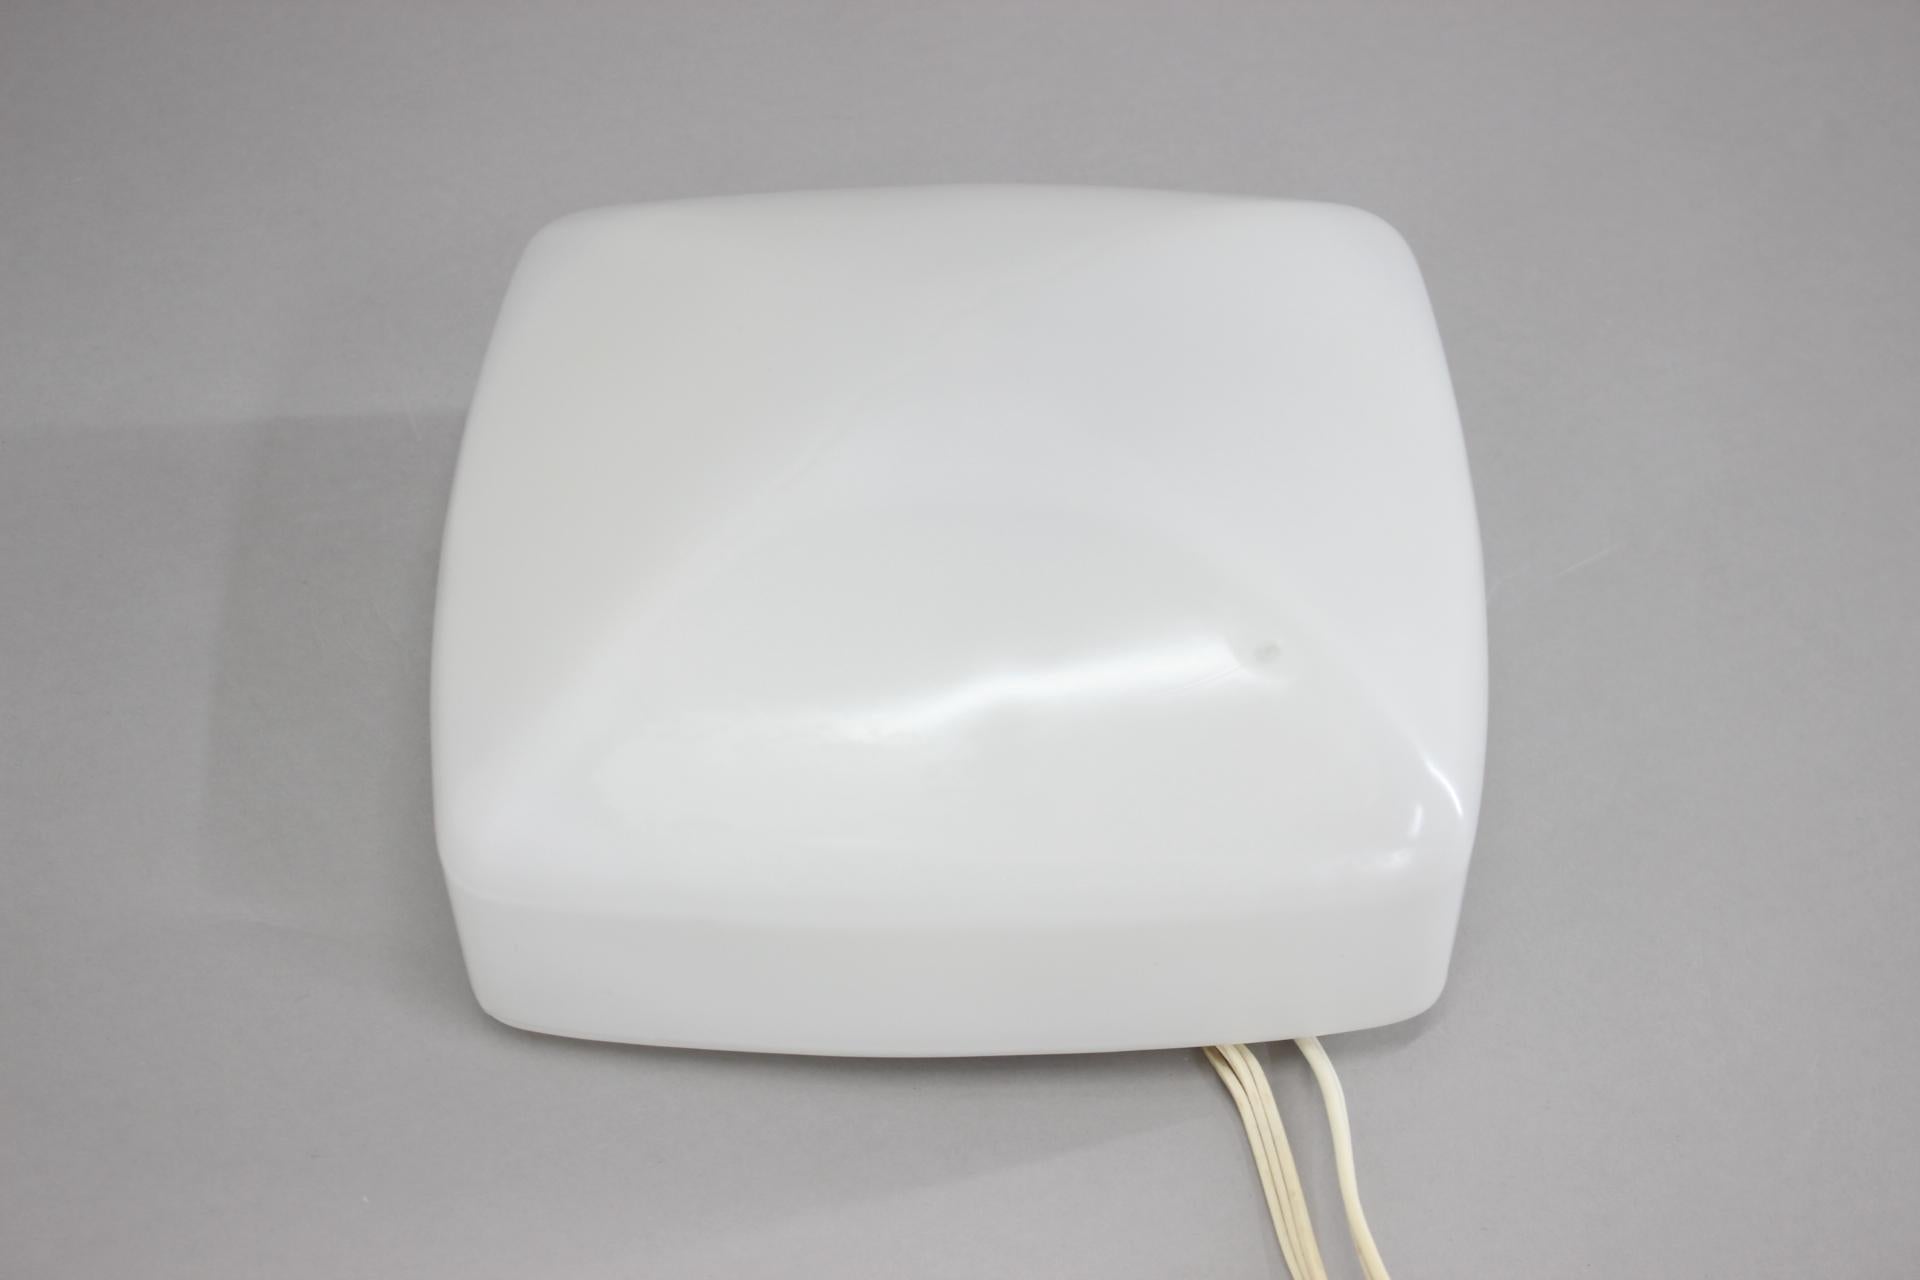 - Vintage milk glass square shaped wall or ceiling lamp.
- Made in former Czechoslovakia in the 1970's.